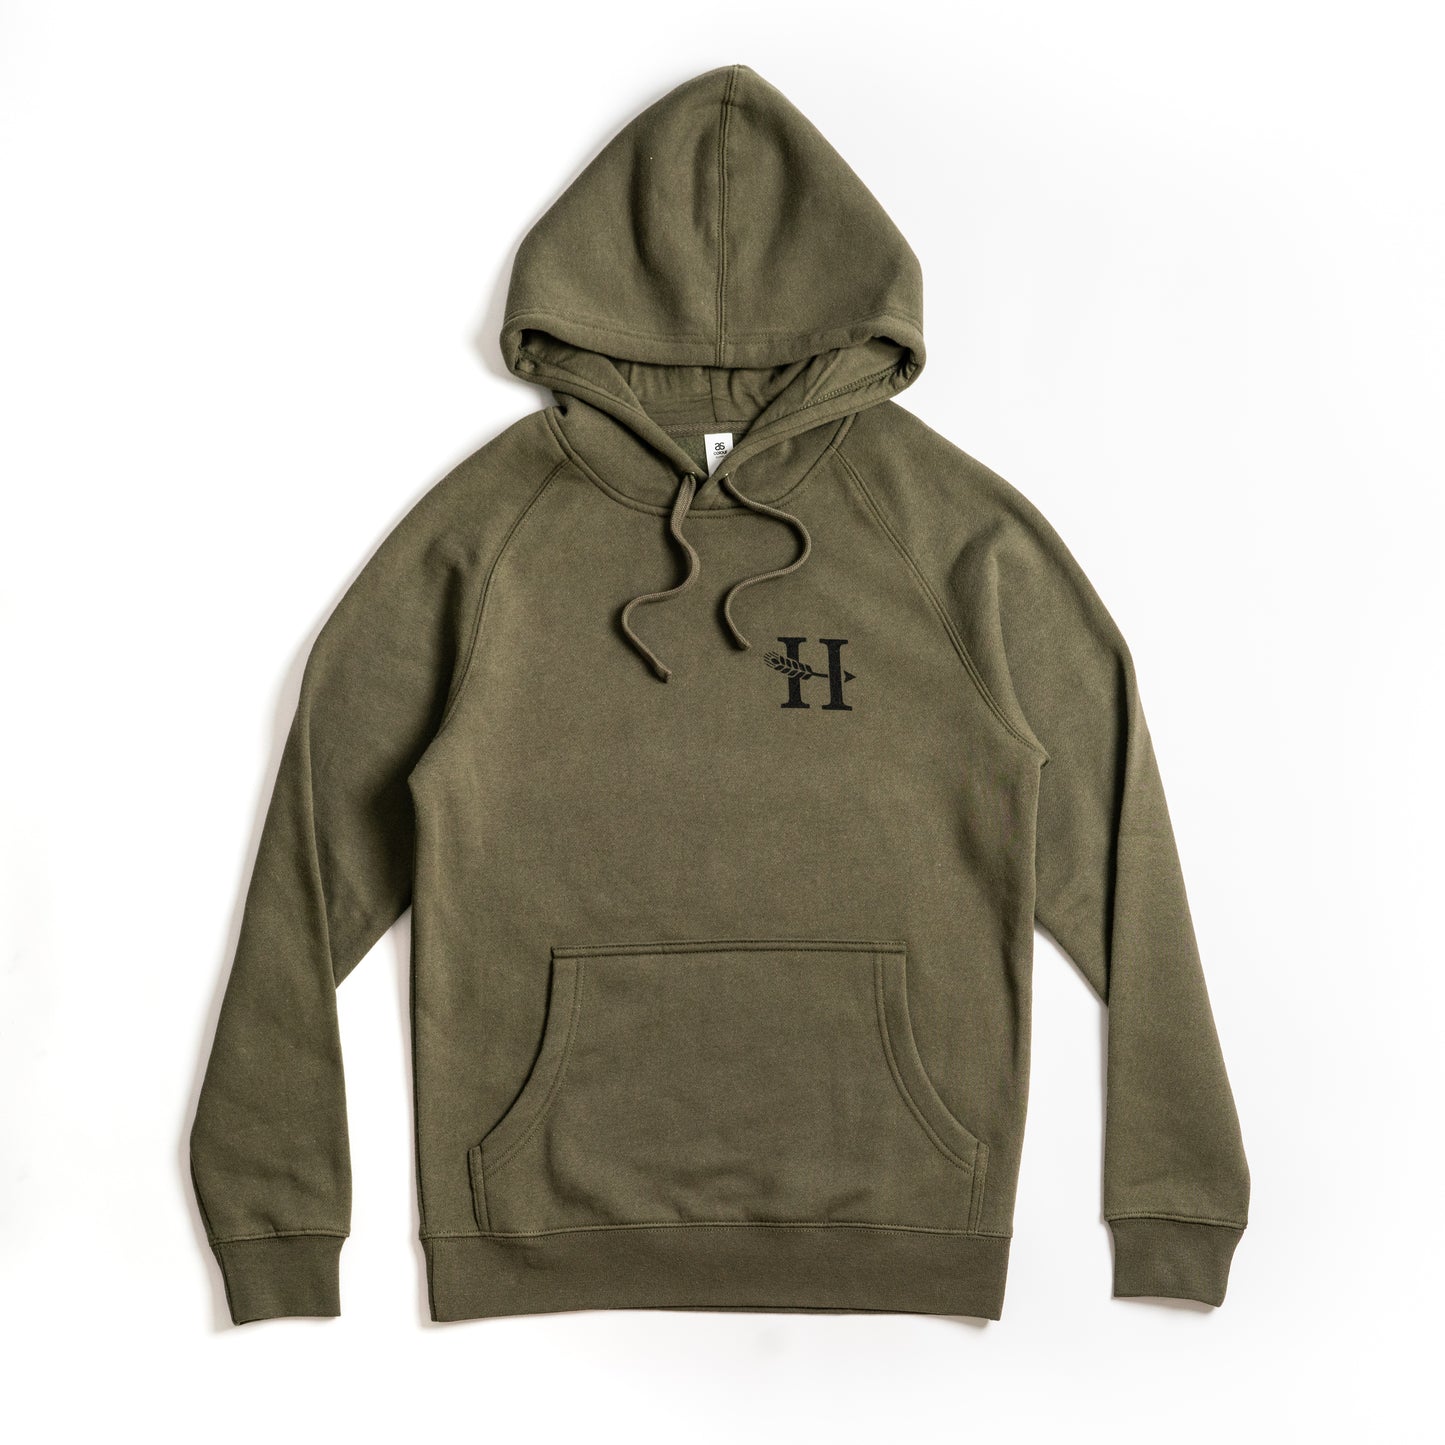 The OG | Army Green Hoodie